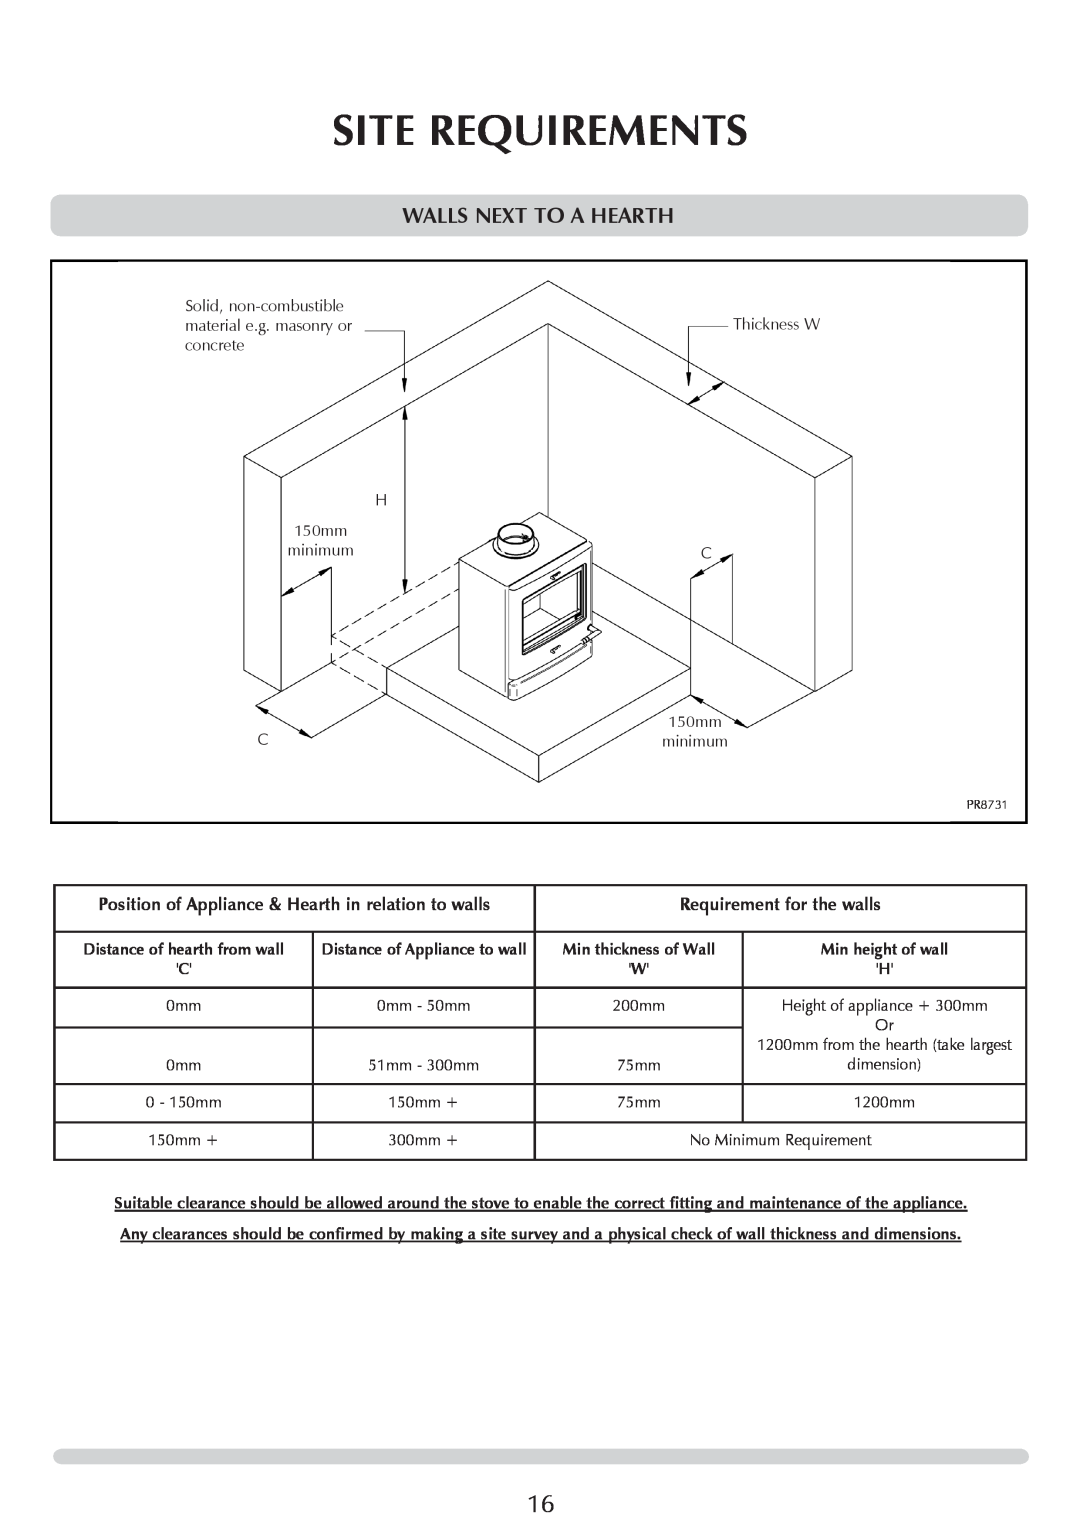 Yeoman YM-CL5W manual Walls Next To A Hearth, Site Requirements, Requirement for the walls, Distance of Appliance to wall 